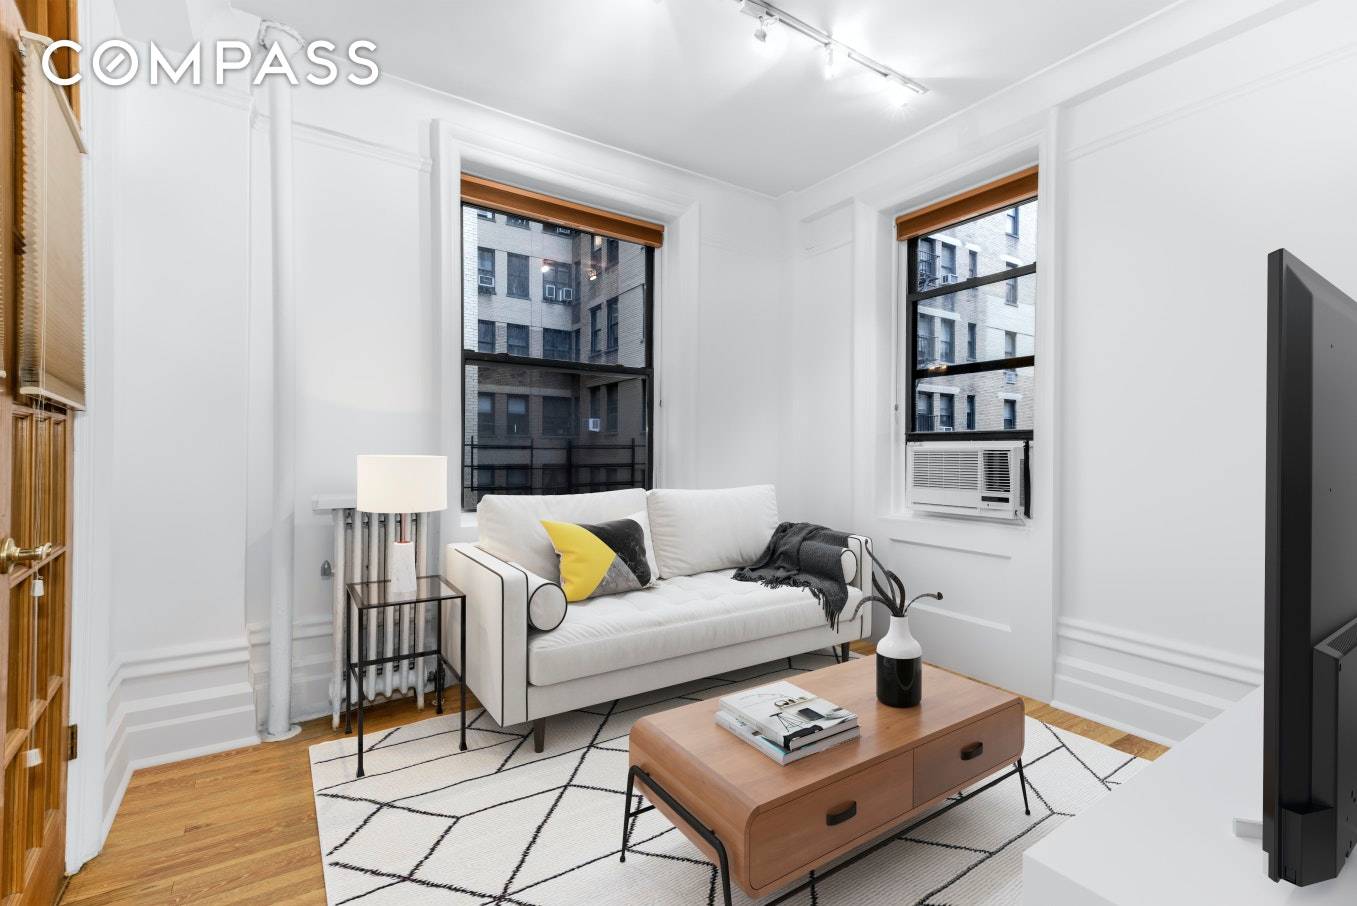 528 West 111th Street Co op Pet friendly Live in super Video intercom Laundry room in building Sublet policy after two year you may sublease two out of five years ...